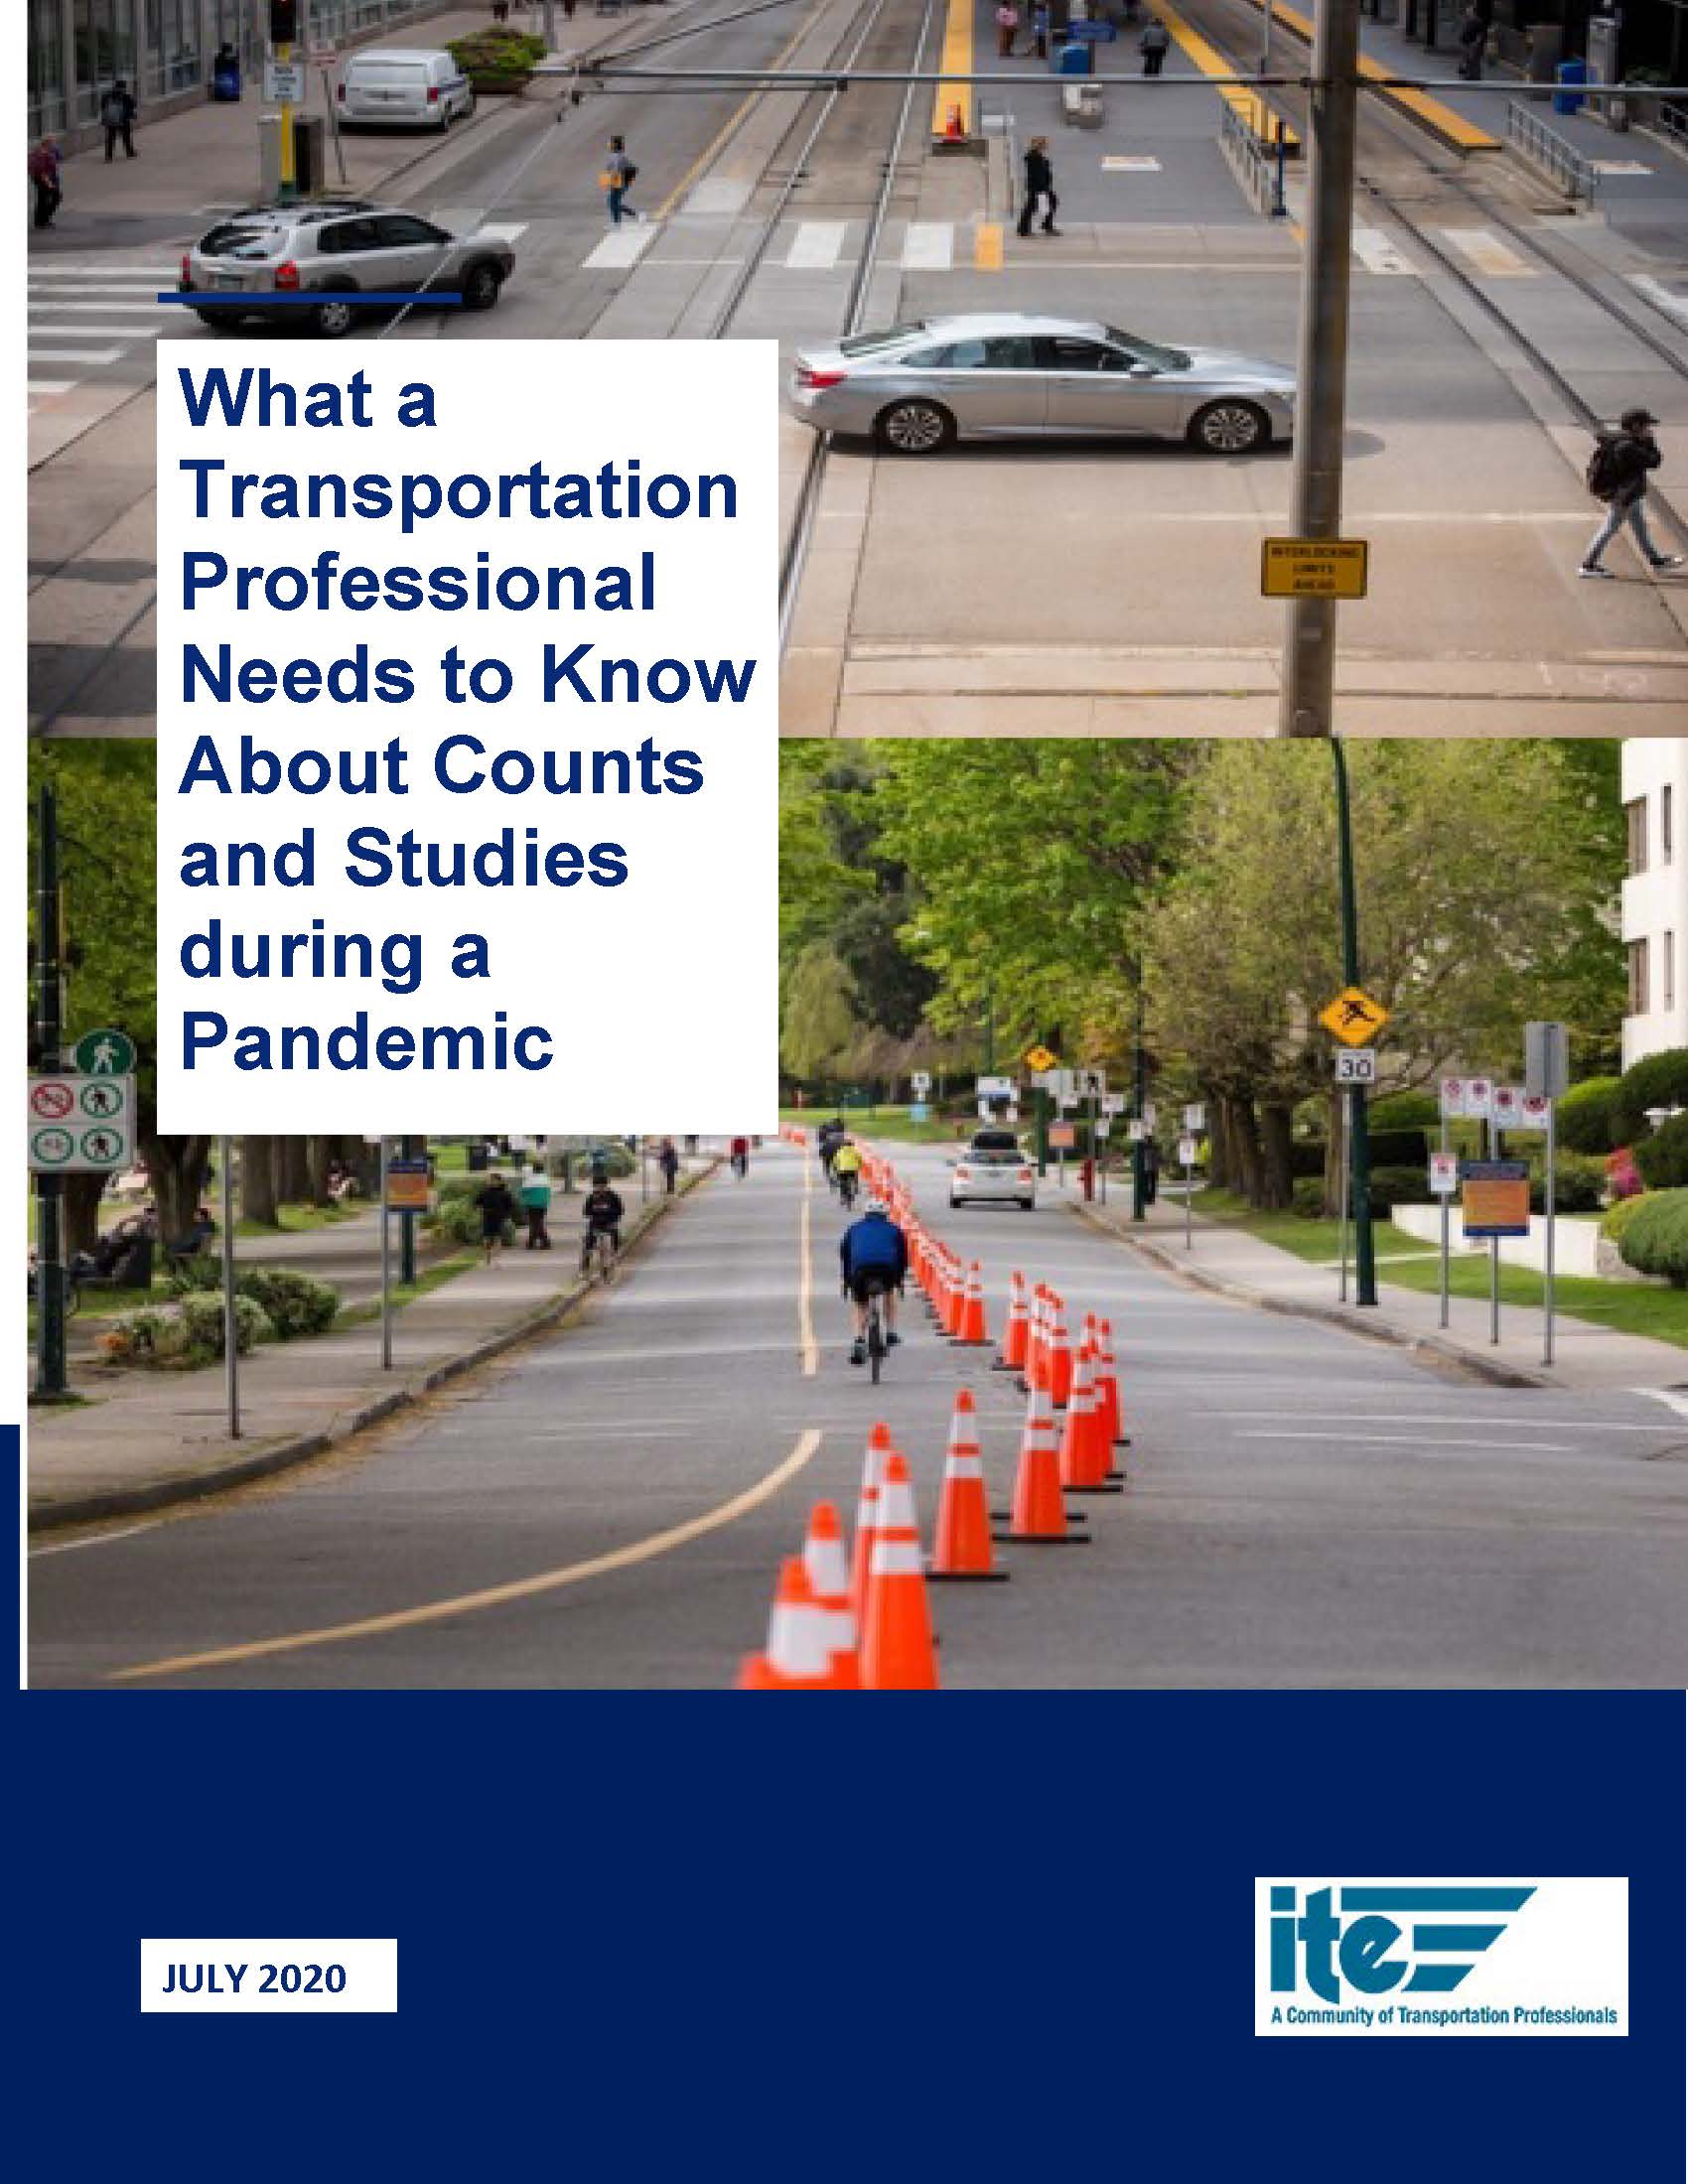 Counts and Studies during a Pandemic